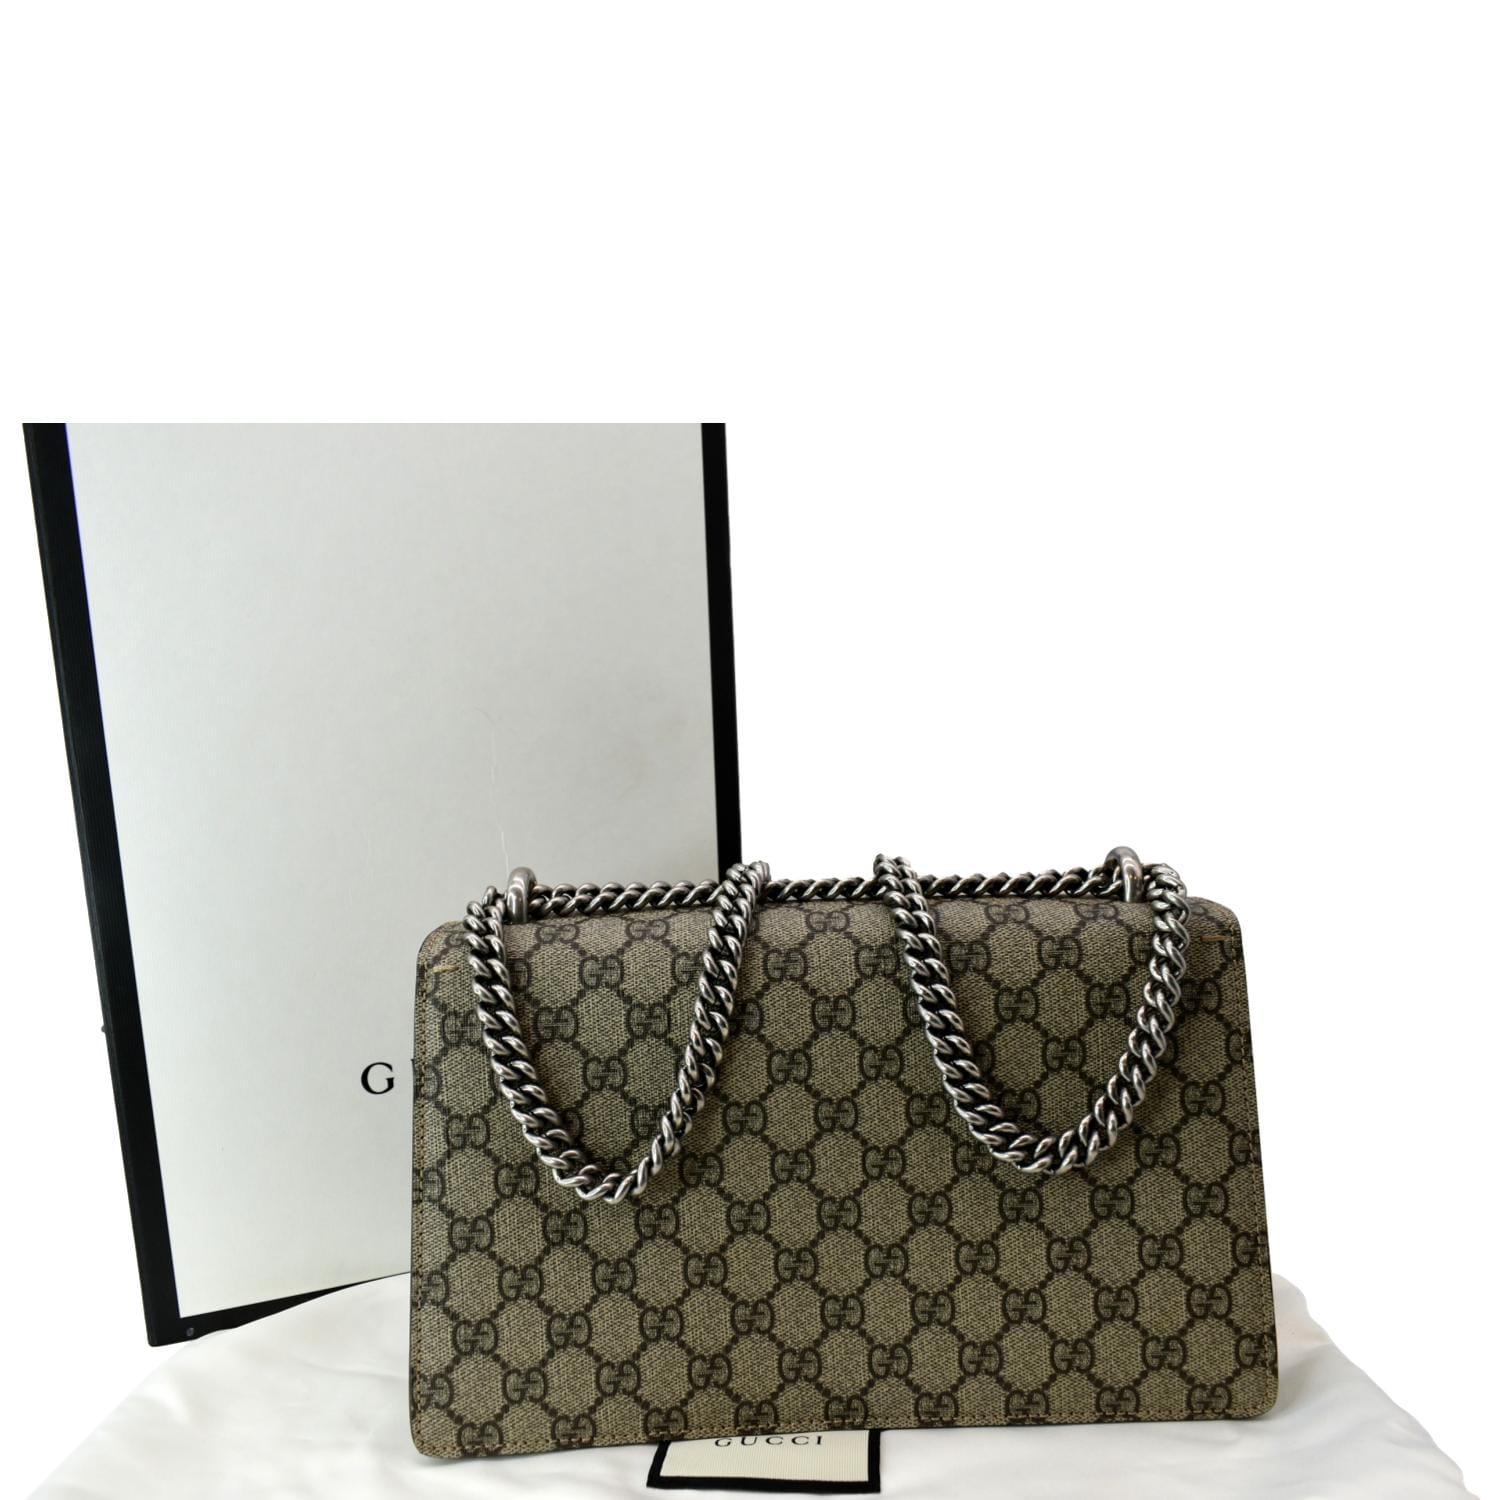 Gucci Beige GG Supreme Canvas and Suede Small Dionysus Shoulder Bag Gucci